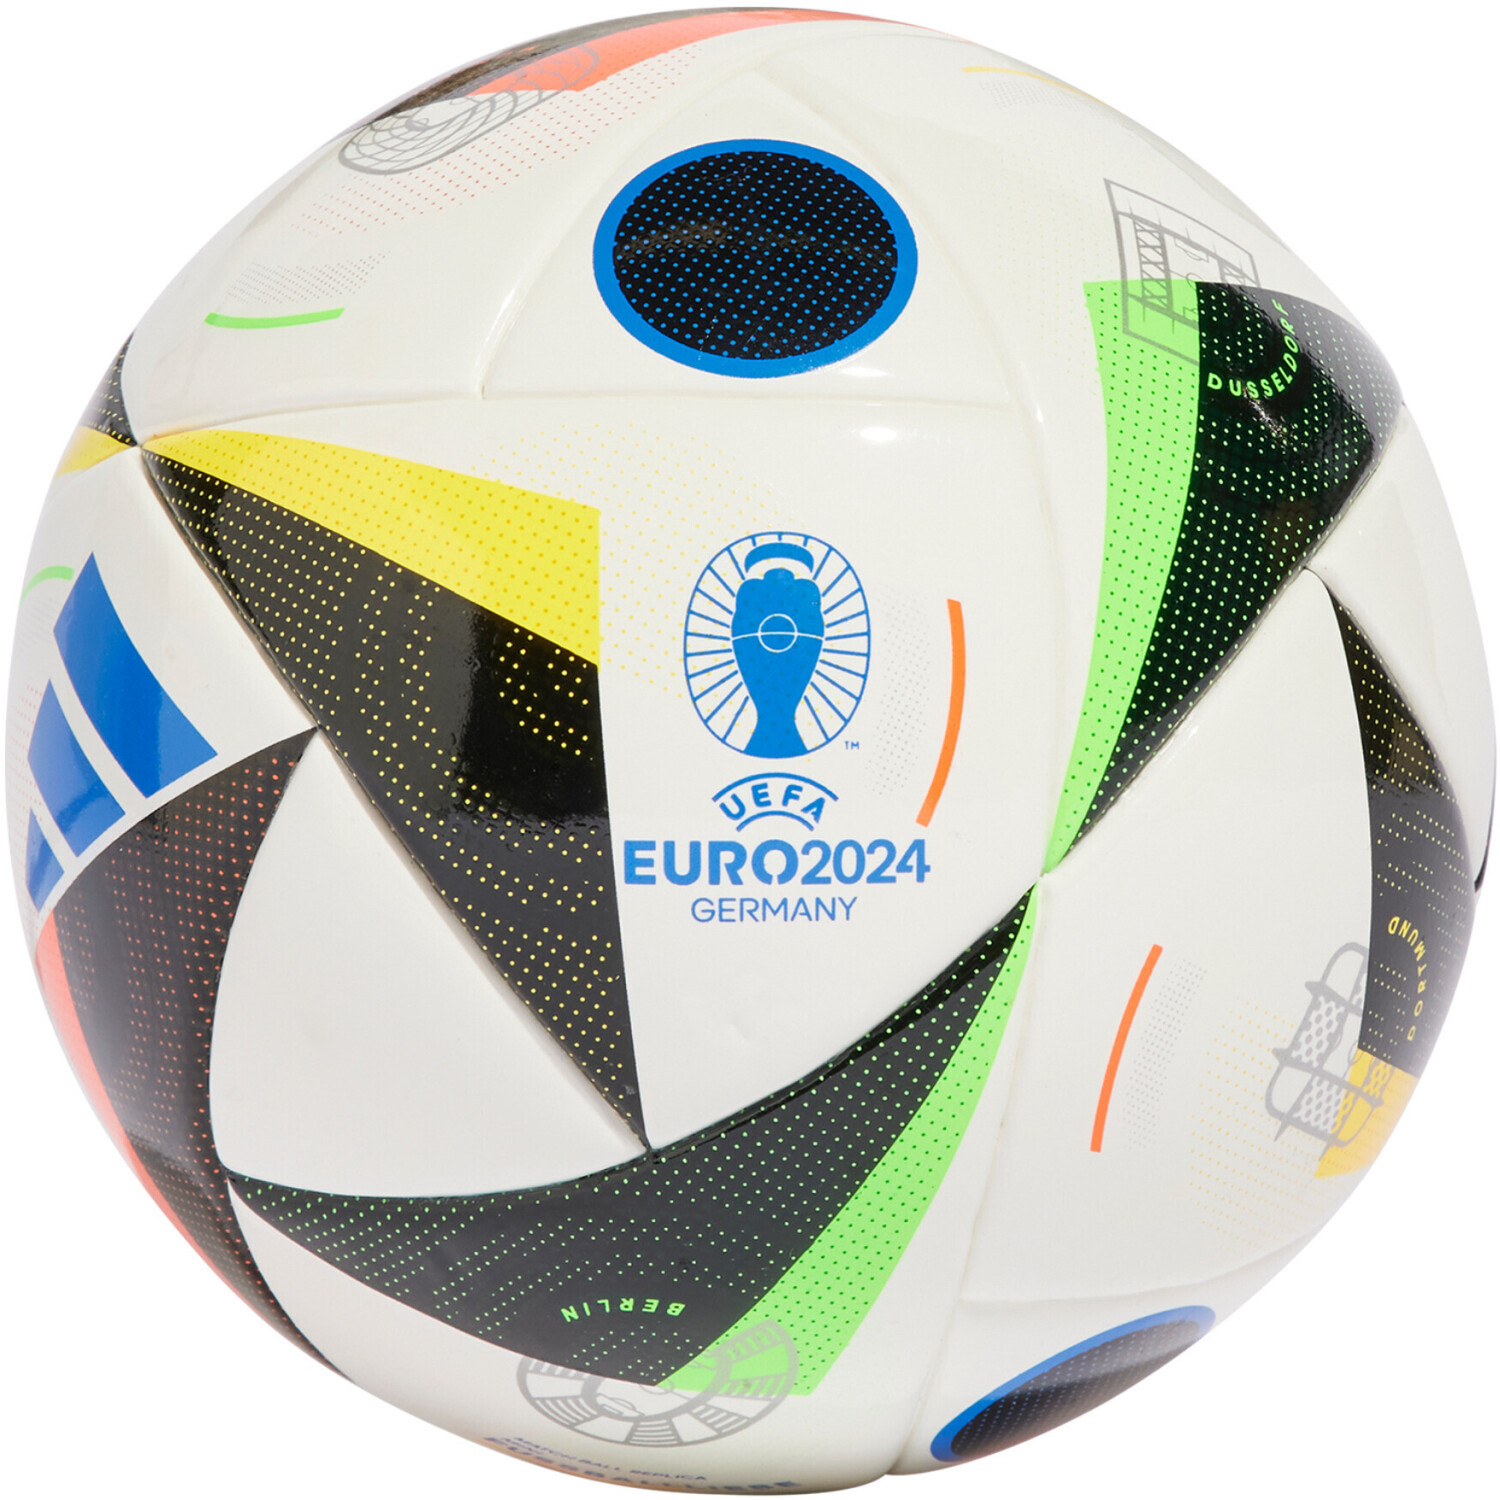 Buy Adidas Fußballliebe Mini (EURO24) (Today) Deals from £10.99 Best on –